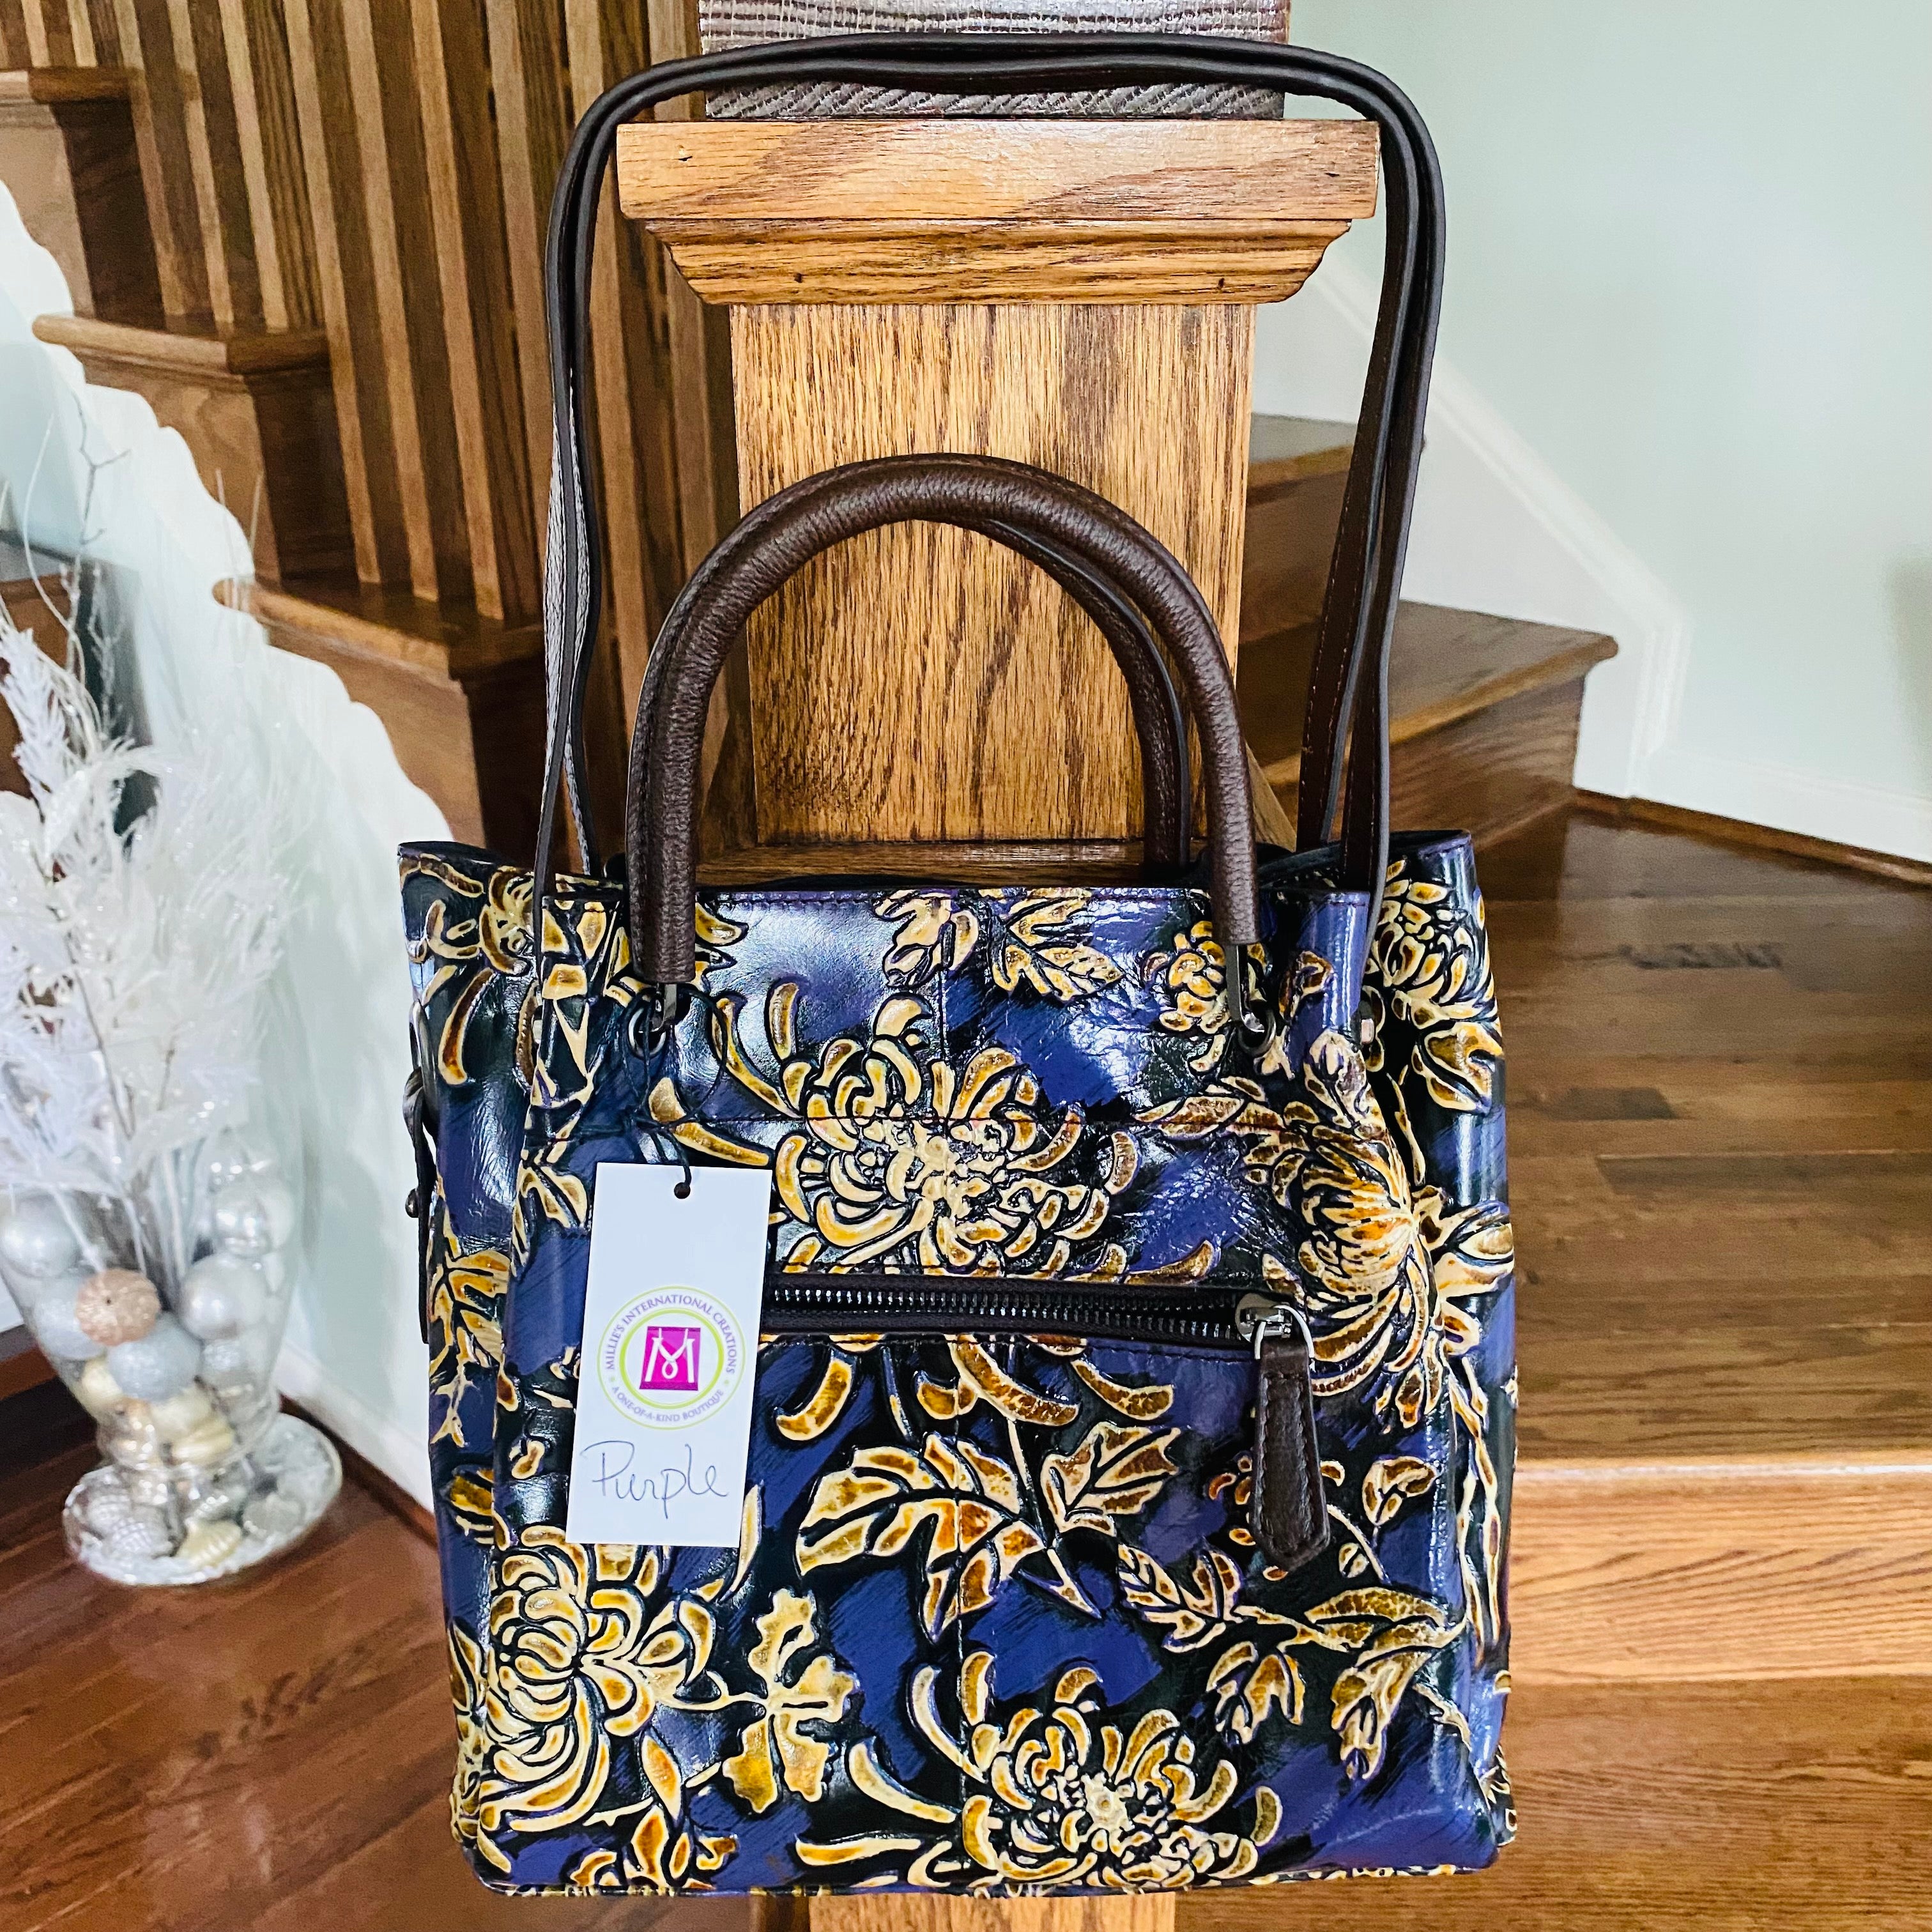 The Pam Z. Vintage Bags